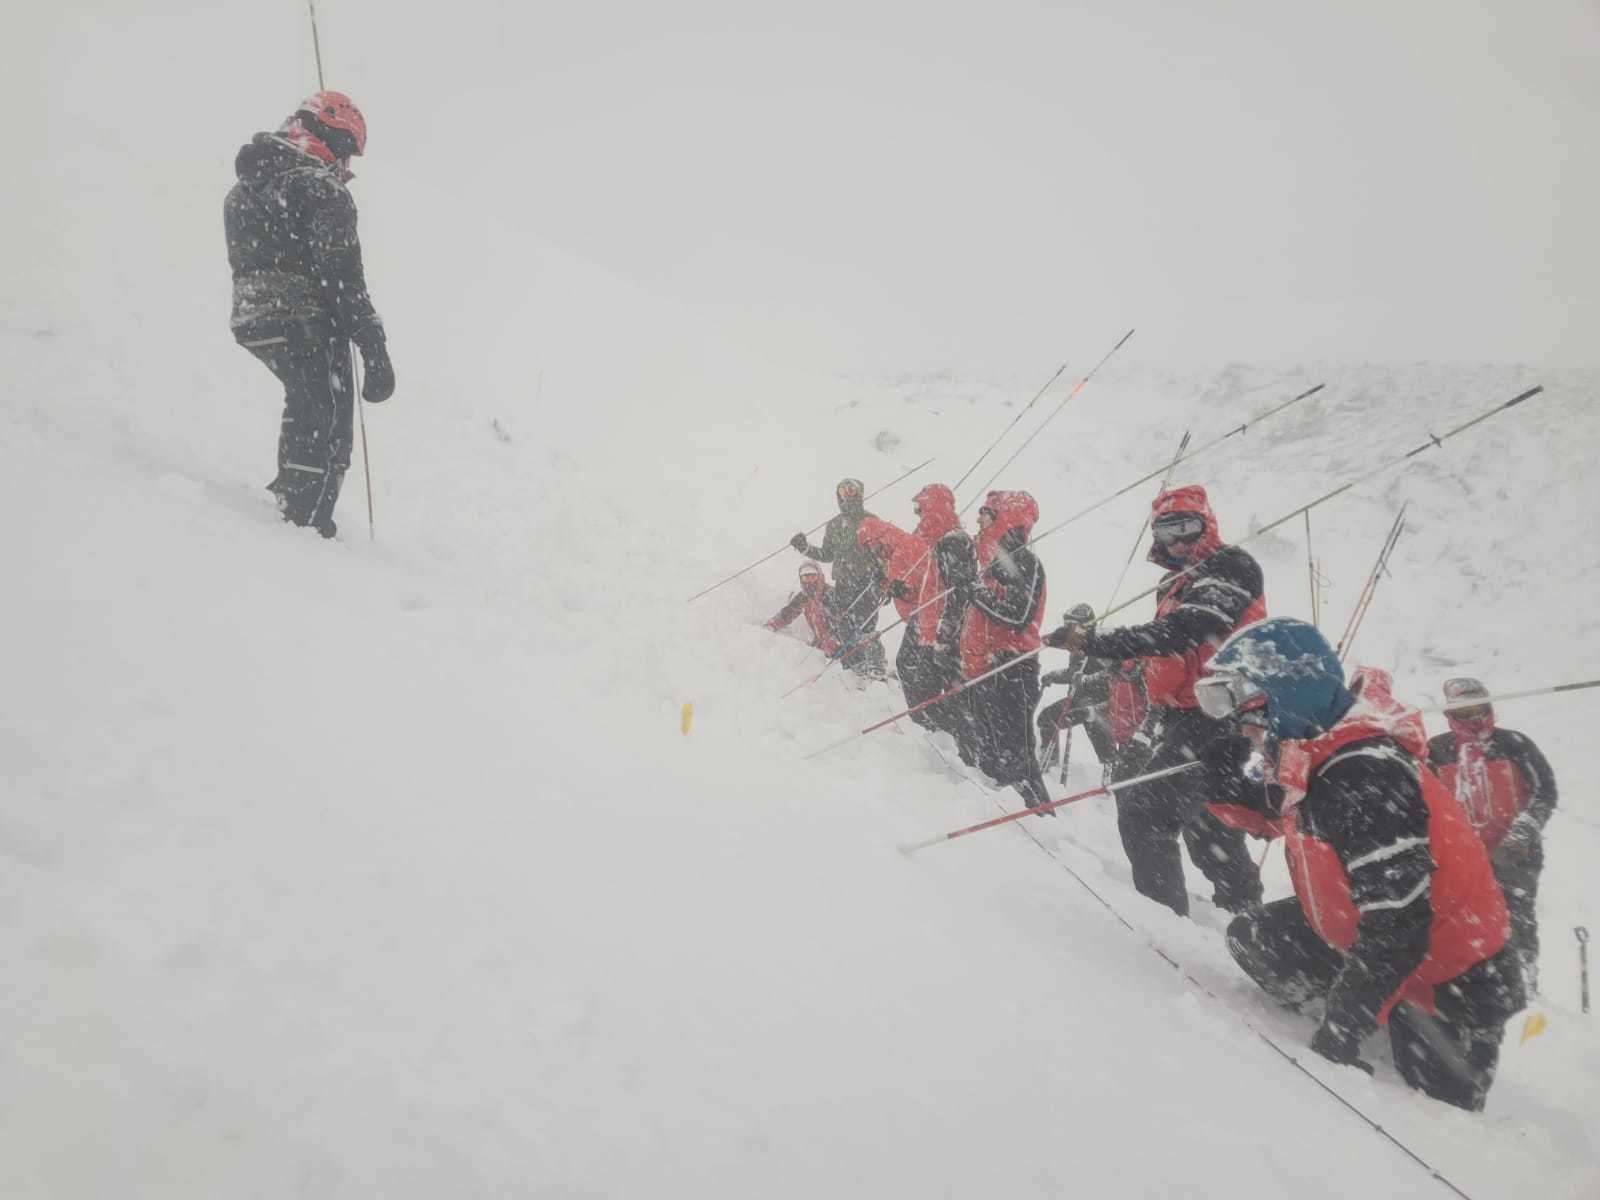 Mountain rescuers practise probing for avalanche survivors in a training exercise.